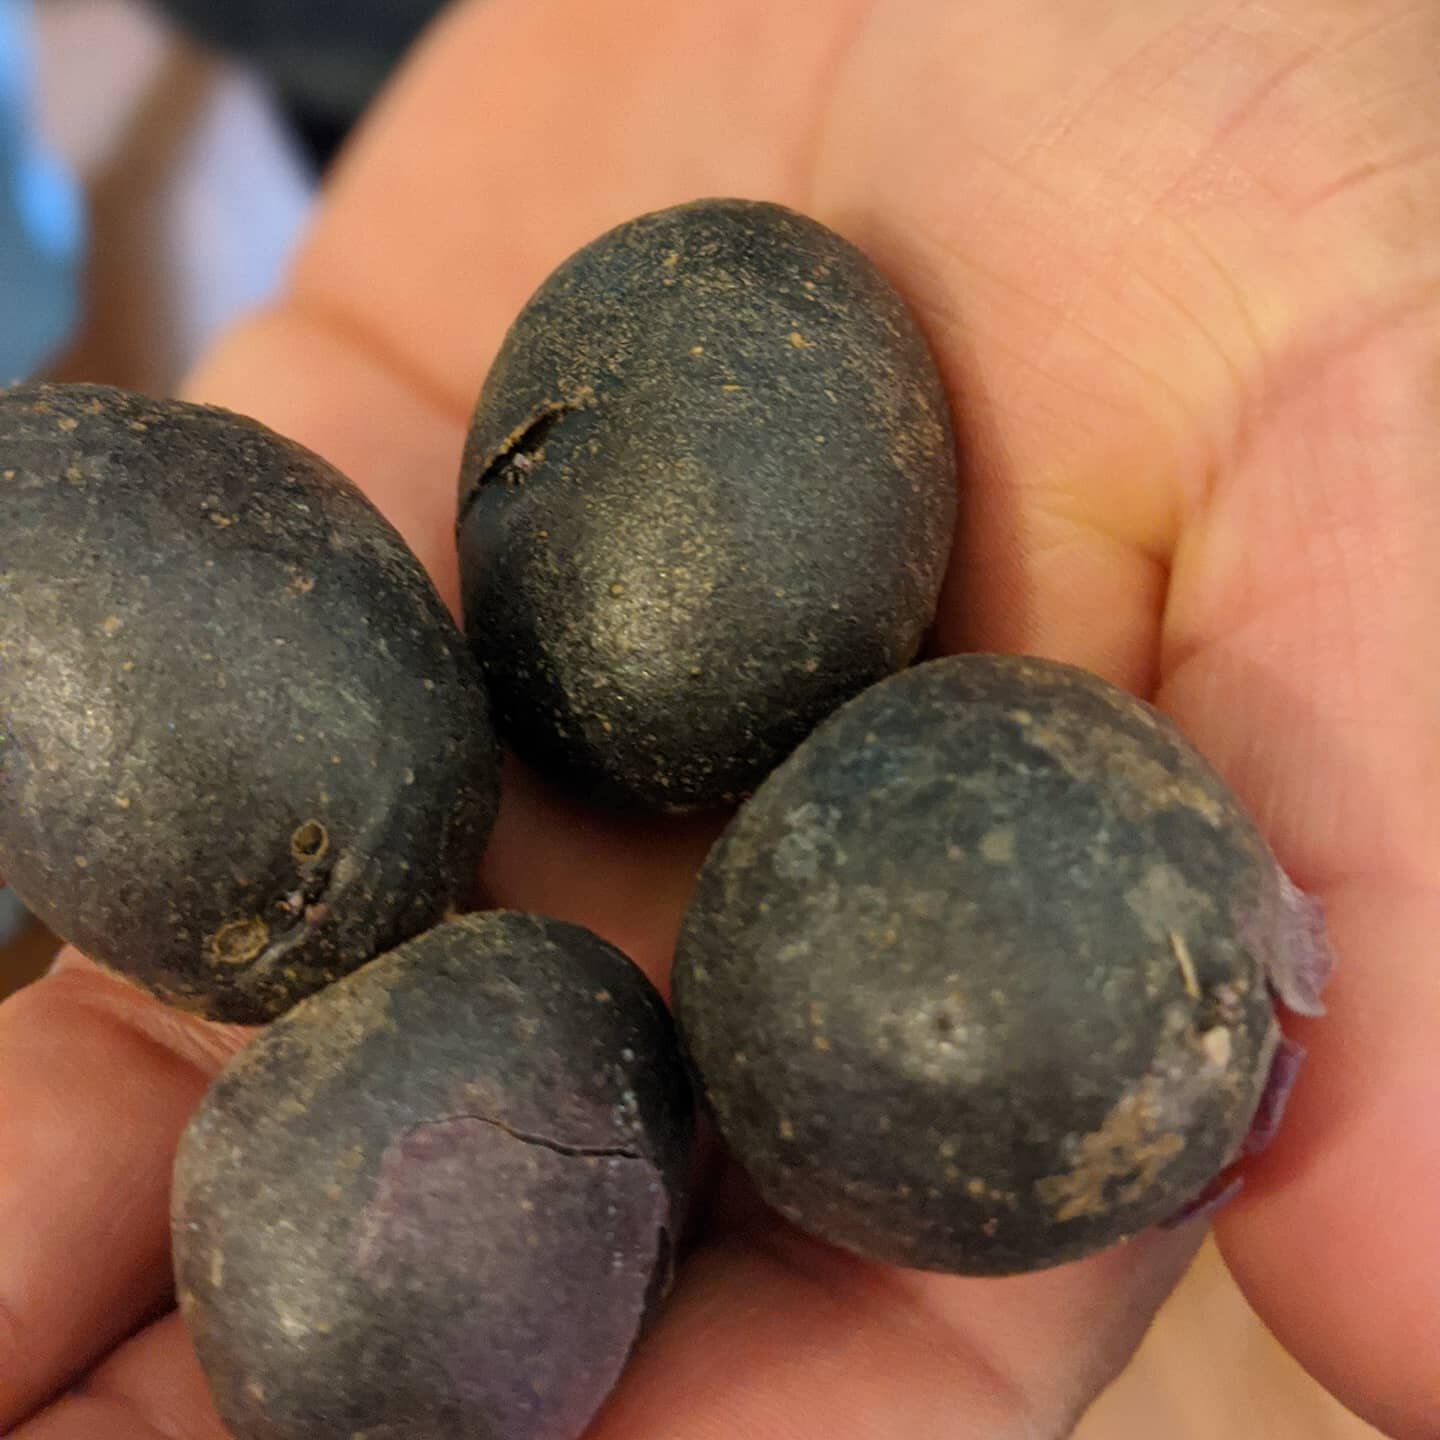 By some counts, there are more than 4,000 #potato varieties in the Andes, Chef Rene's homeland. Here are papas moradas fresh from the #garden today! #papas #growyourown #westchesternyeats